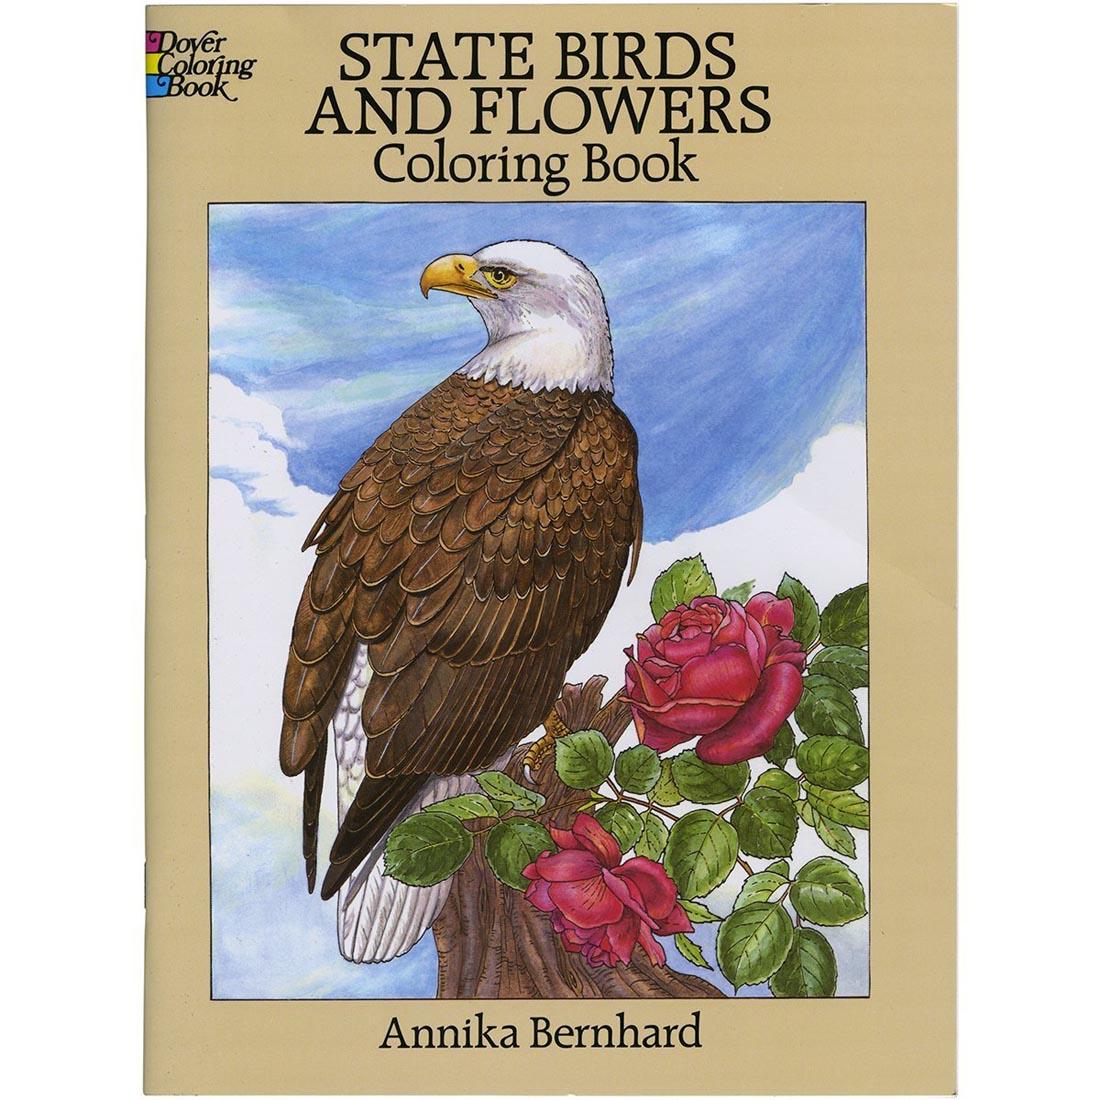 State Birds and Flowers Coloring Book by Dover